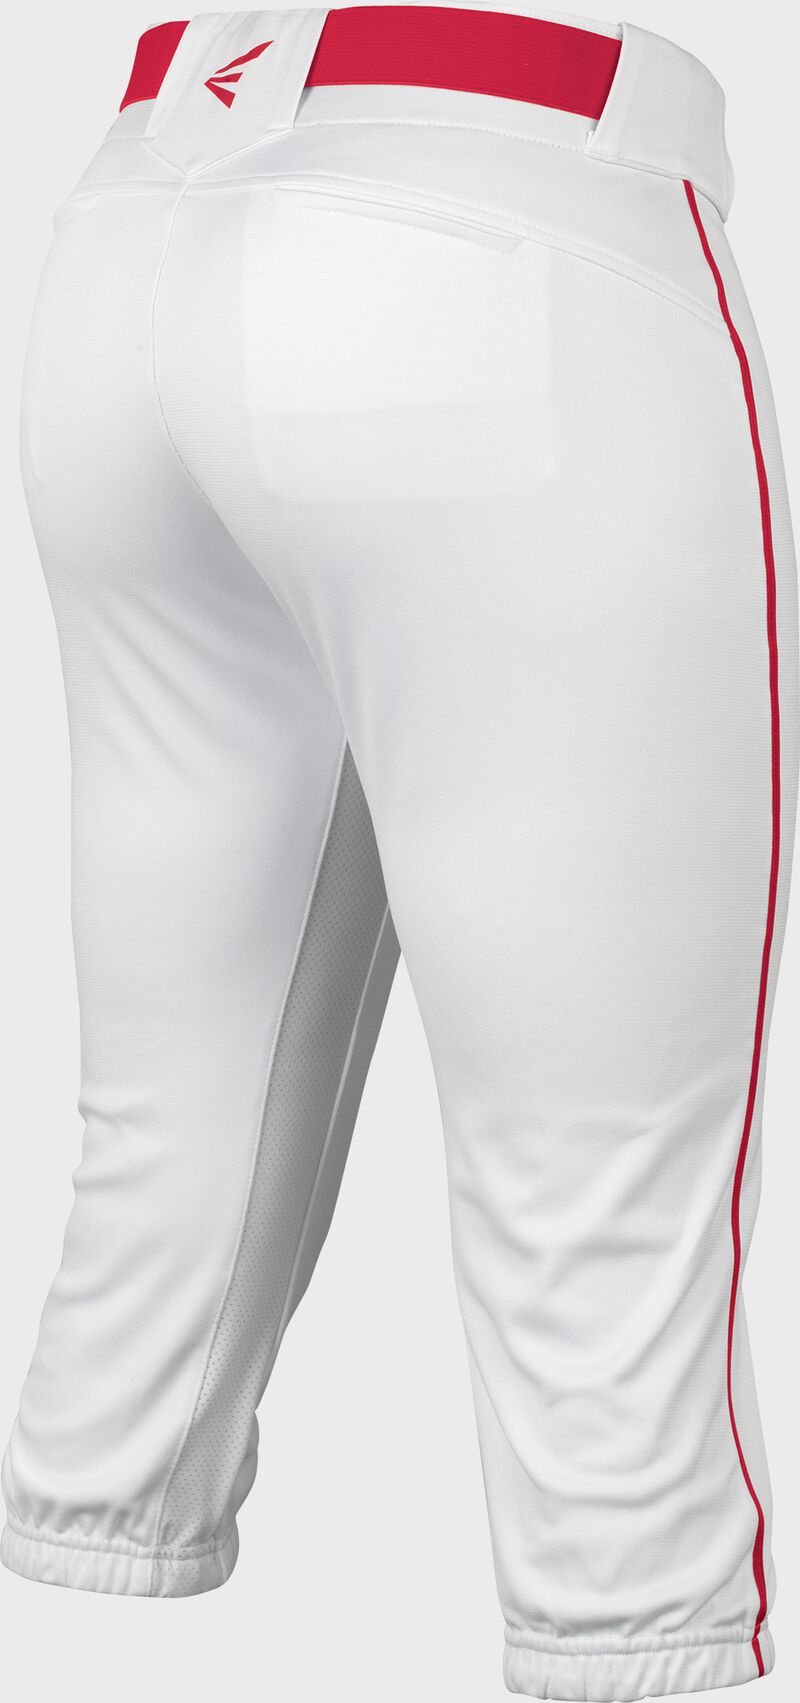 Easton Prowess Softball Pant Women's Piped WHITE/RED M